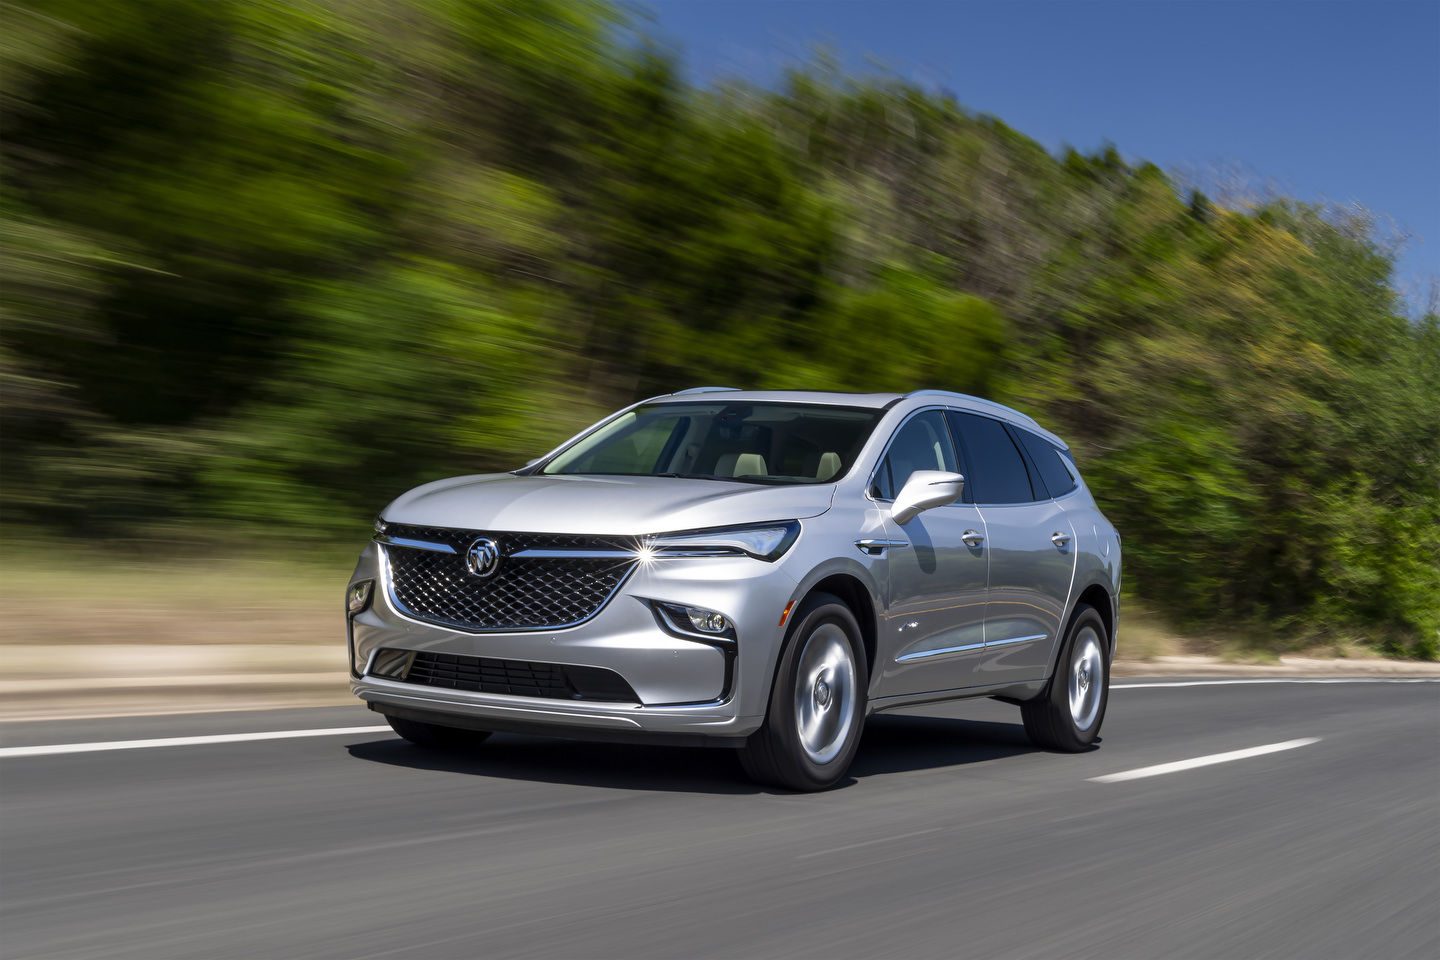 2022 Buick Enclave: a host of interesting changes